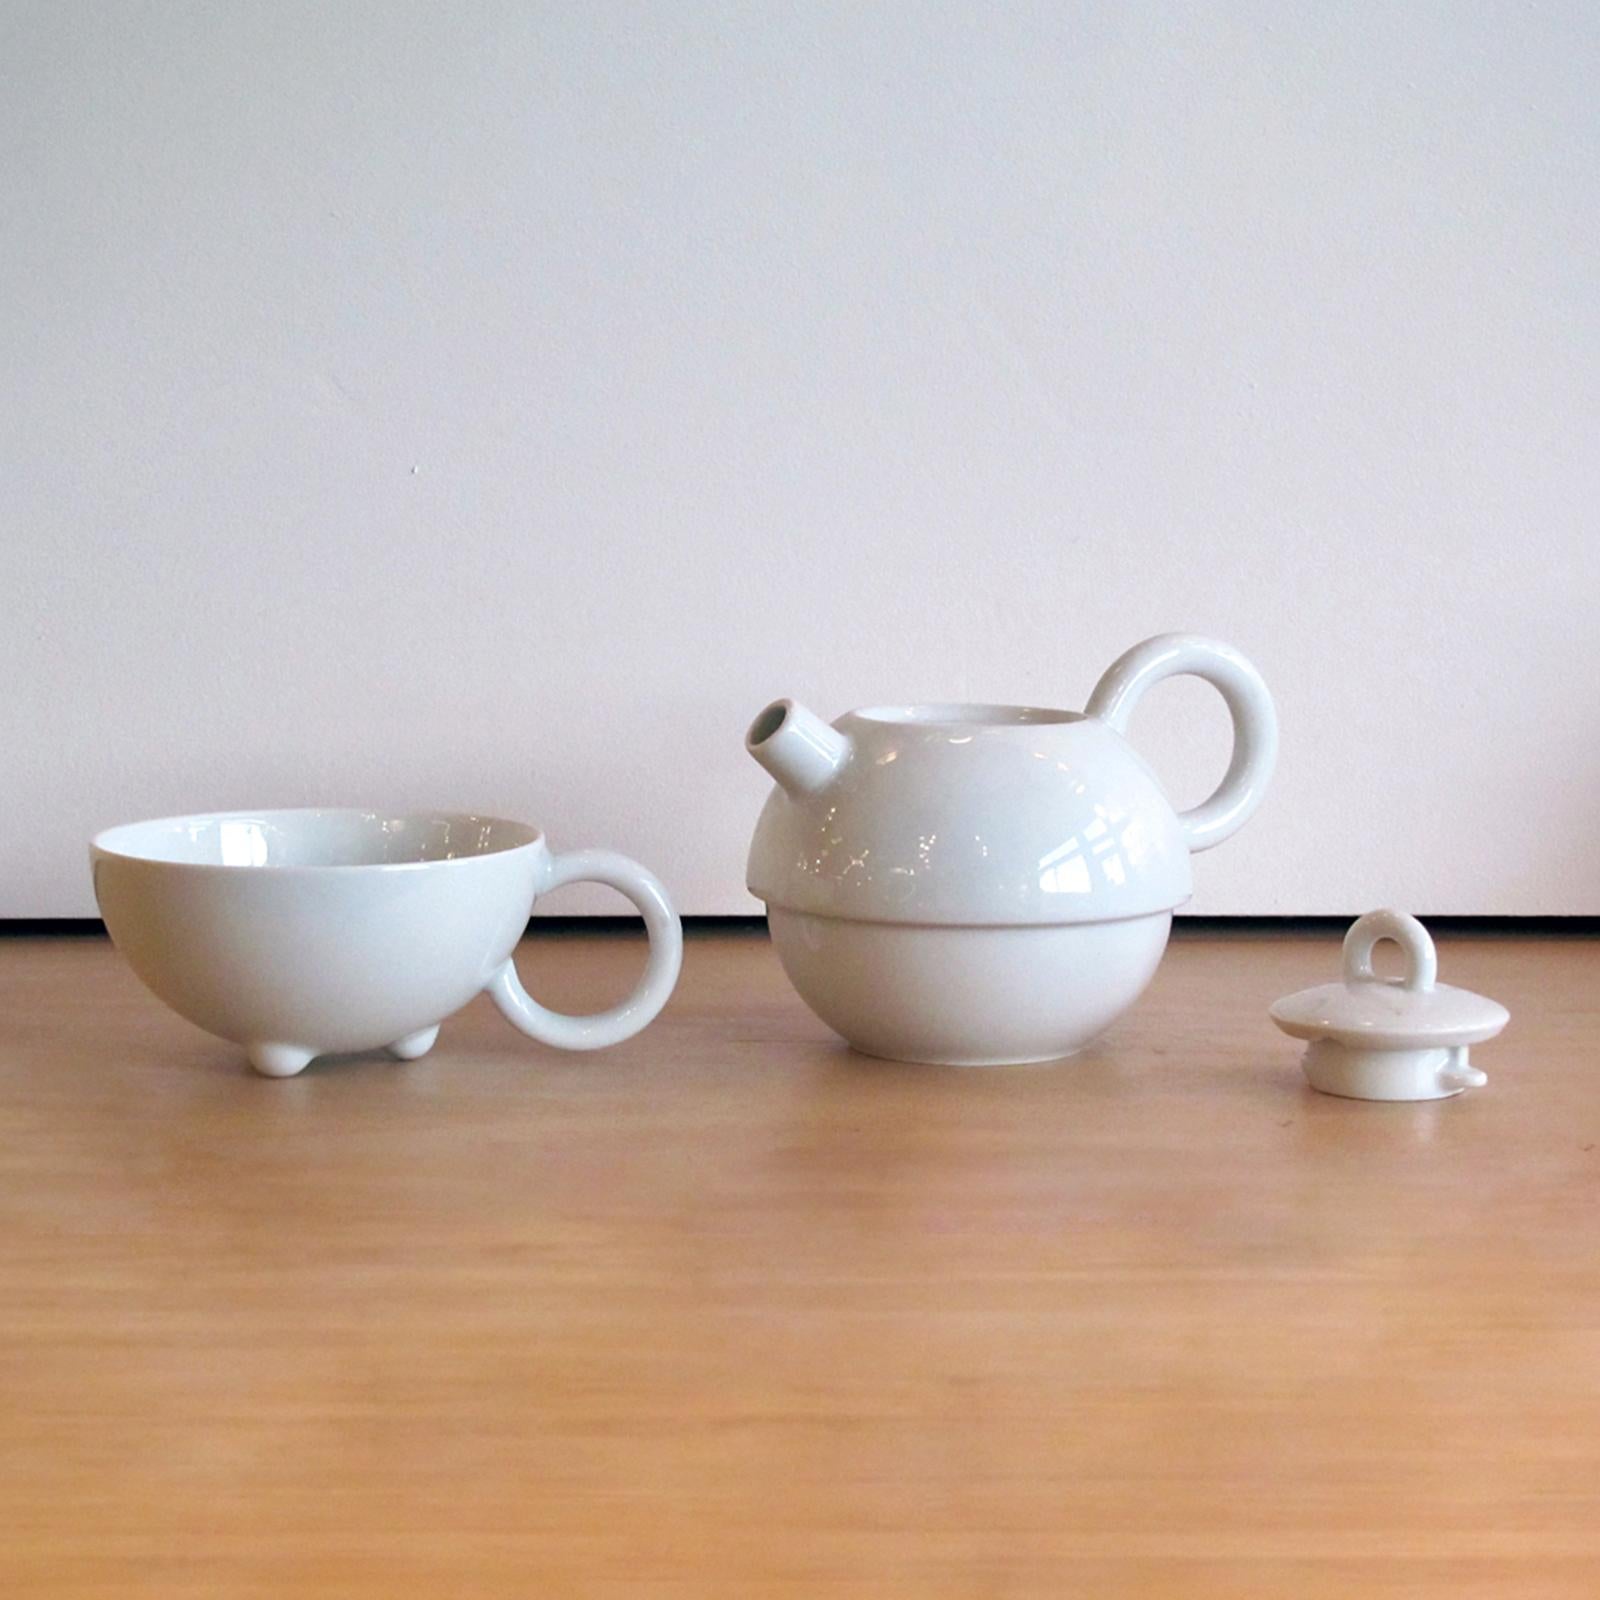 Matteo Thun for Arzberg Tea-for-One Set, 1980 In Good Condition For Sale In Los Angeles, CA